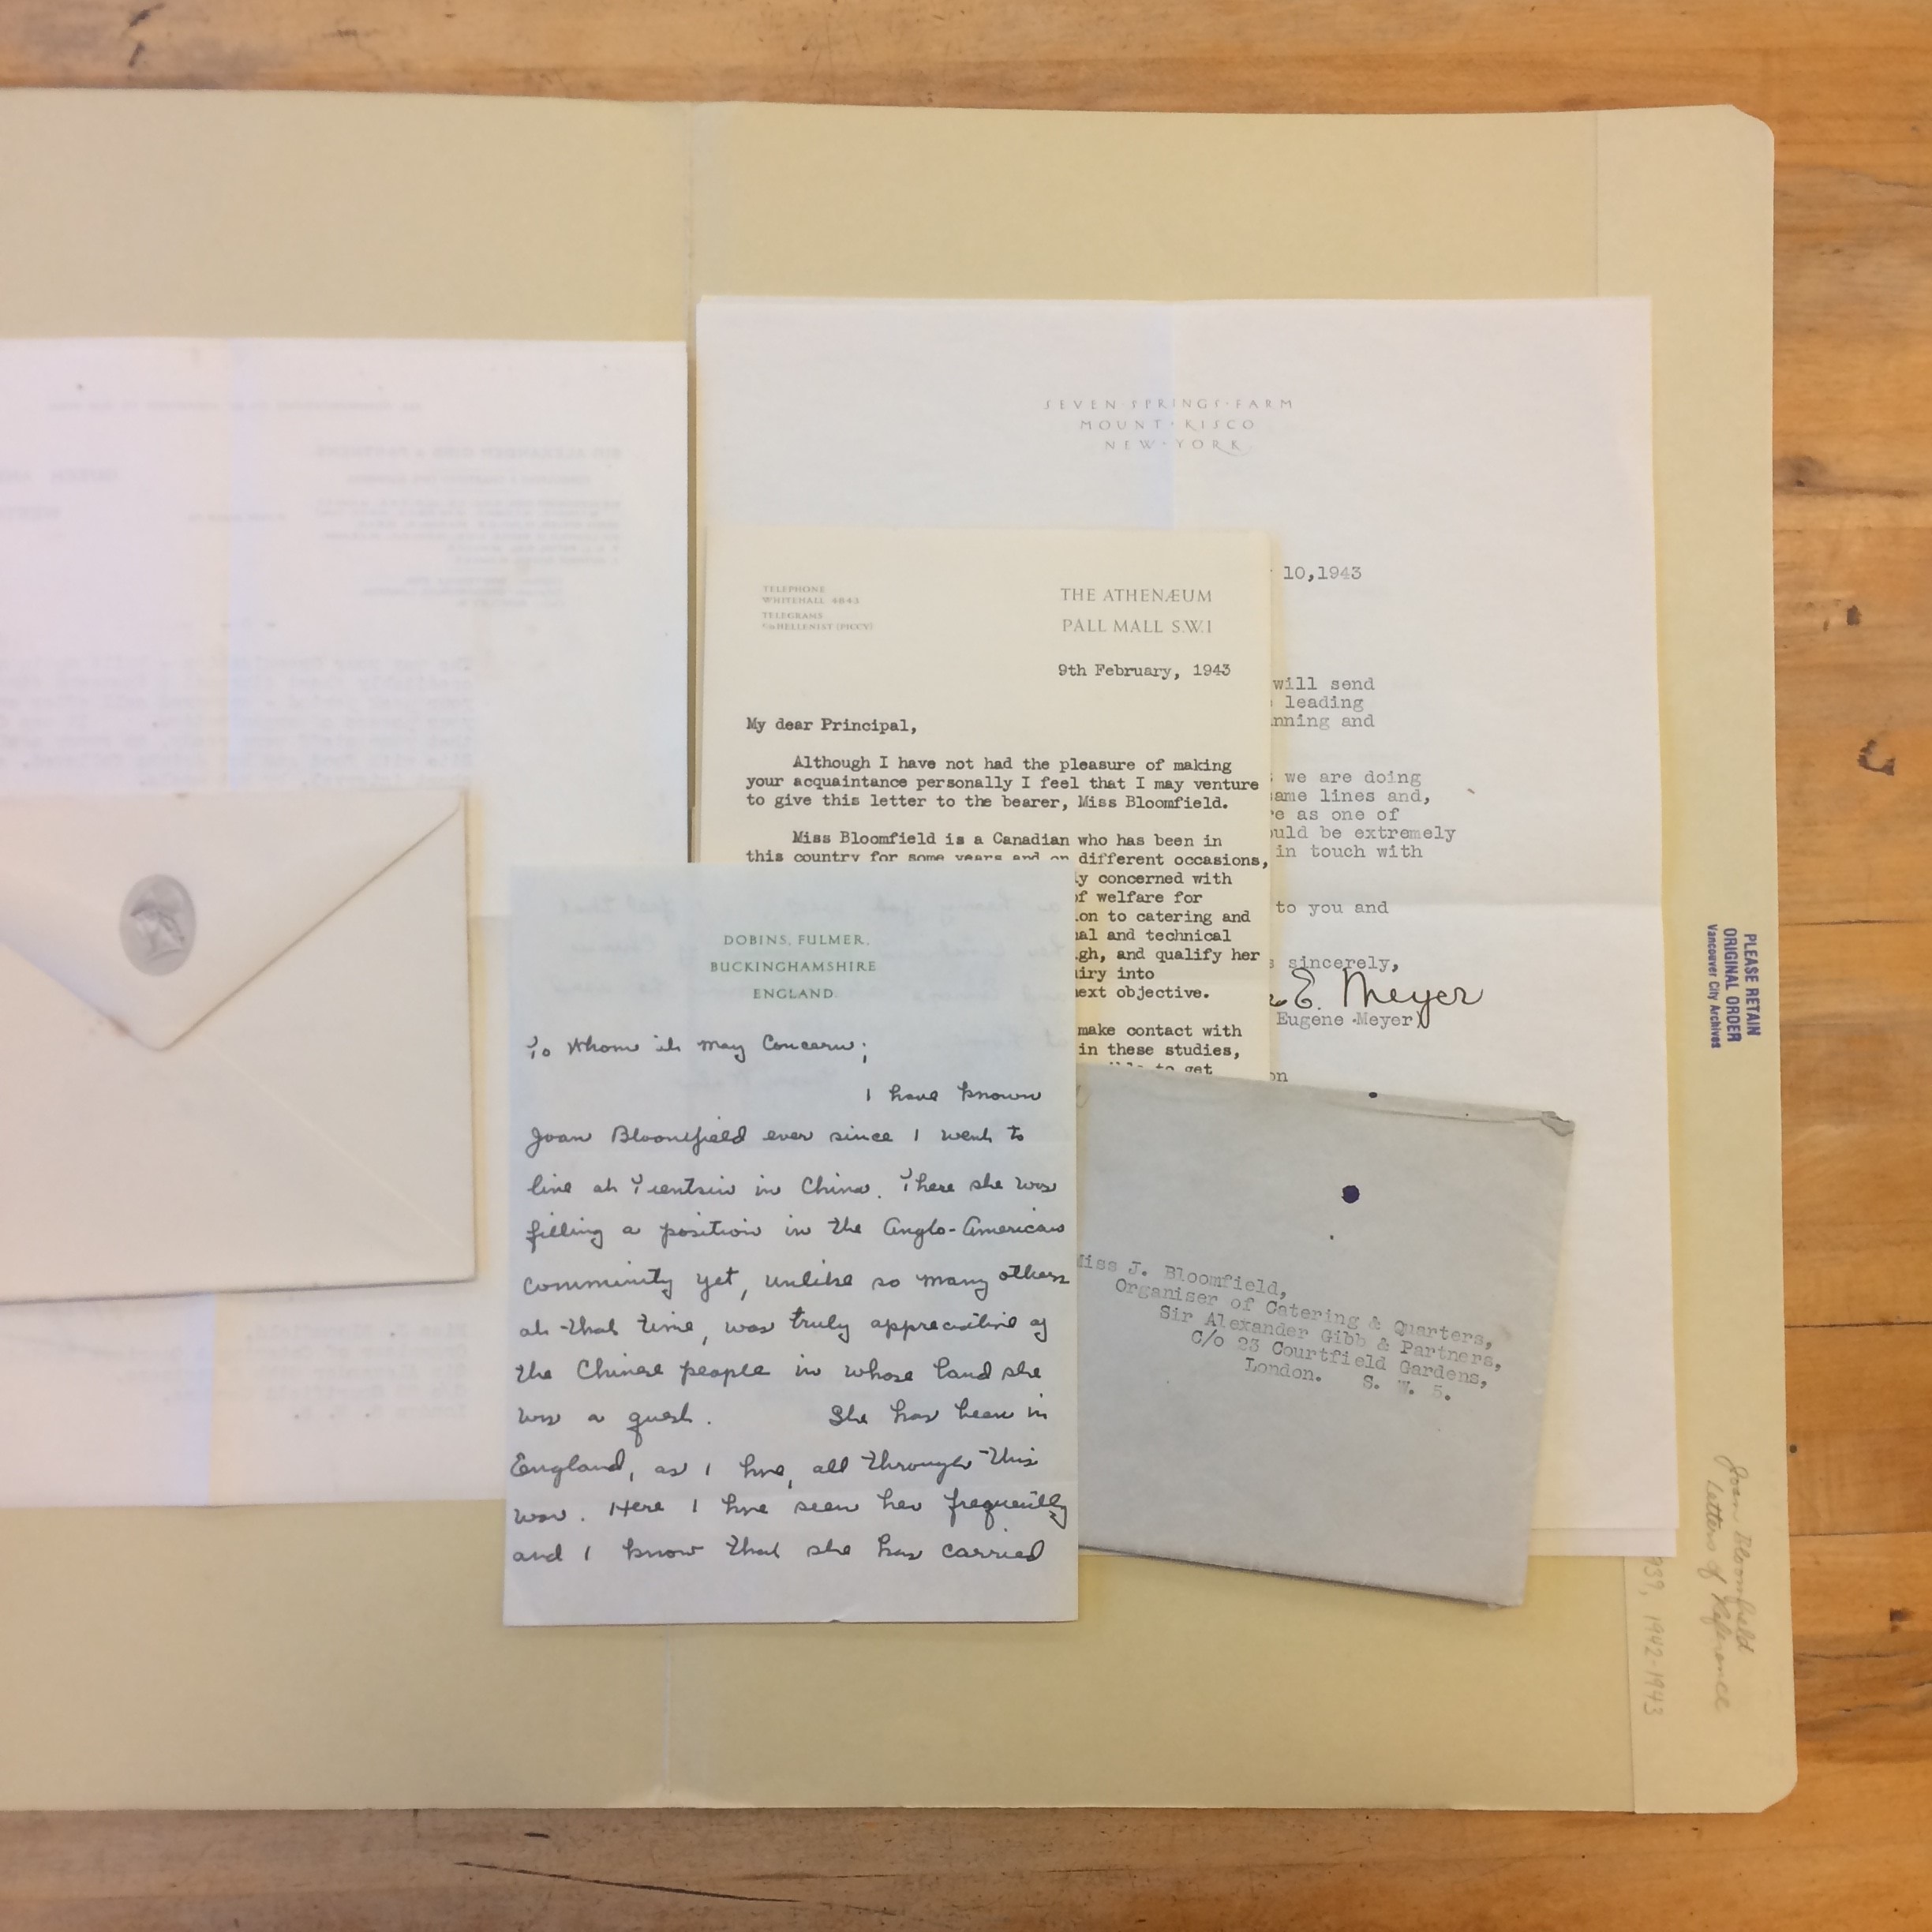 Letters of reference for Joan Bloomfield, 1939-1943. Reference code: AM973-S6--. Photo by Bronwyn Smyth